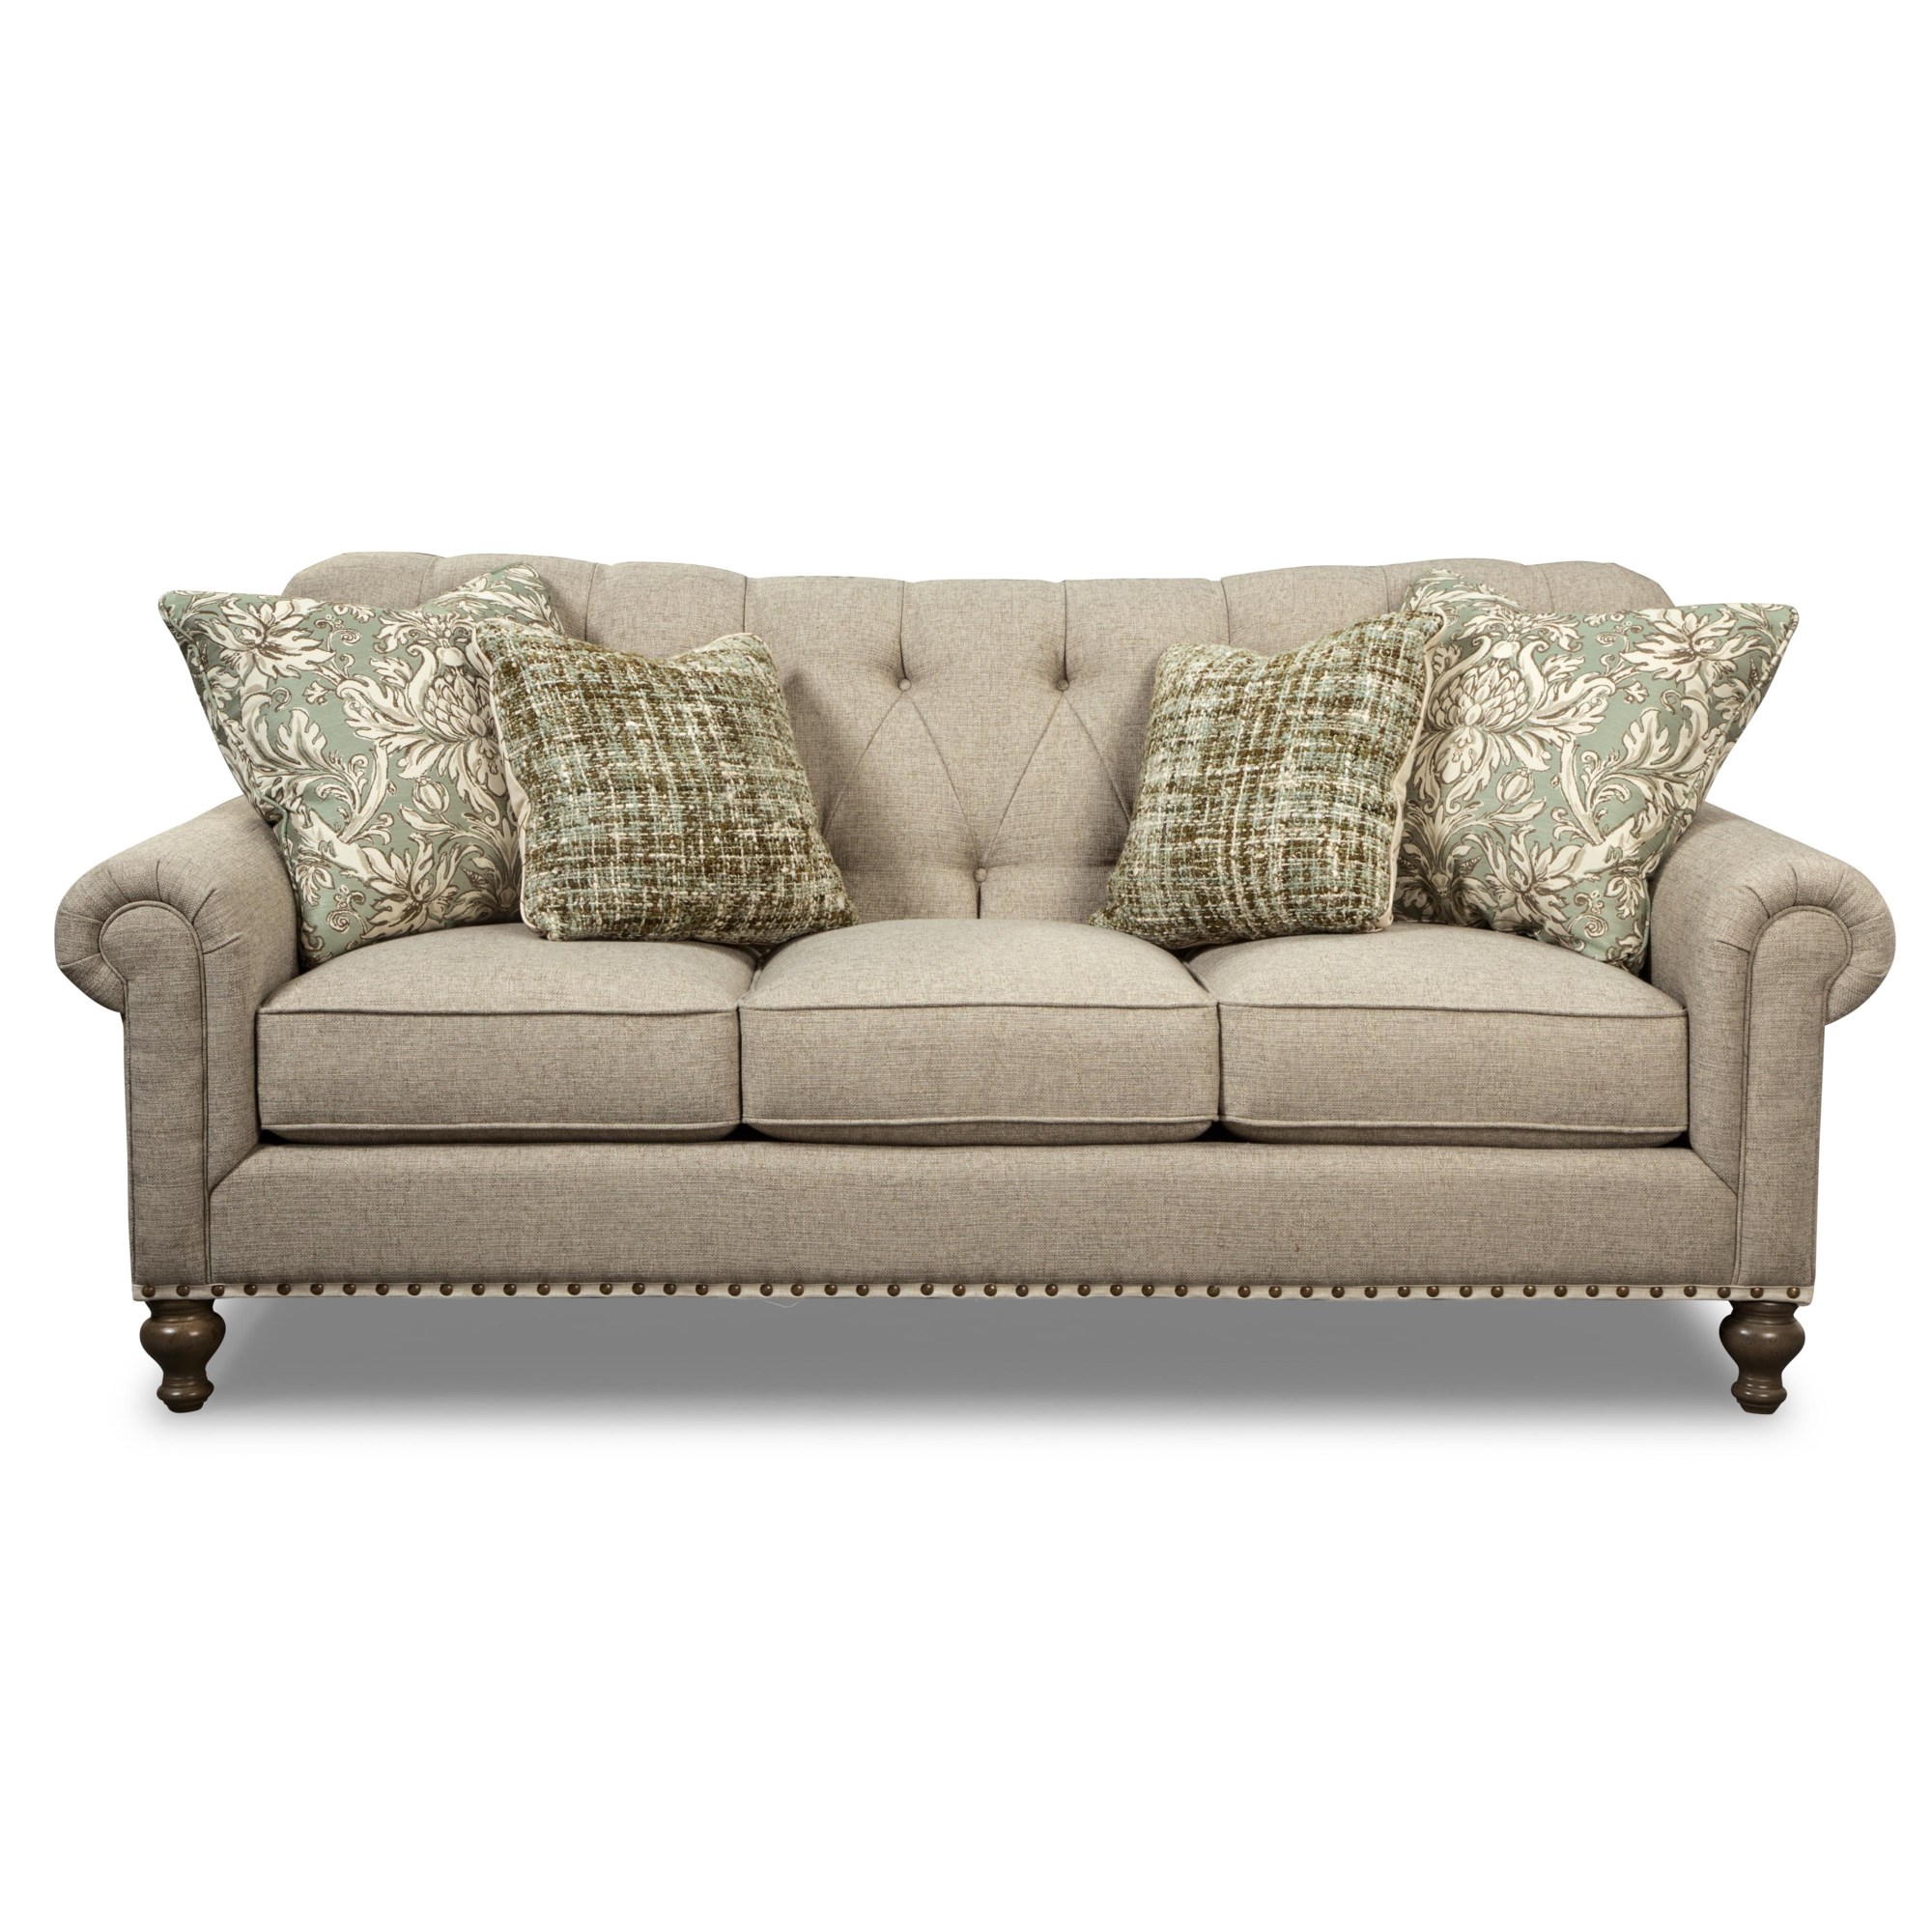 Stationary Sofa Lagniappe Uph Sofas with | Tufted Nailheads PD754100 Traditional by - Home Deen | Camelback Store Paula P754150BD Craftmaster